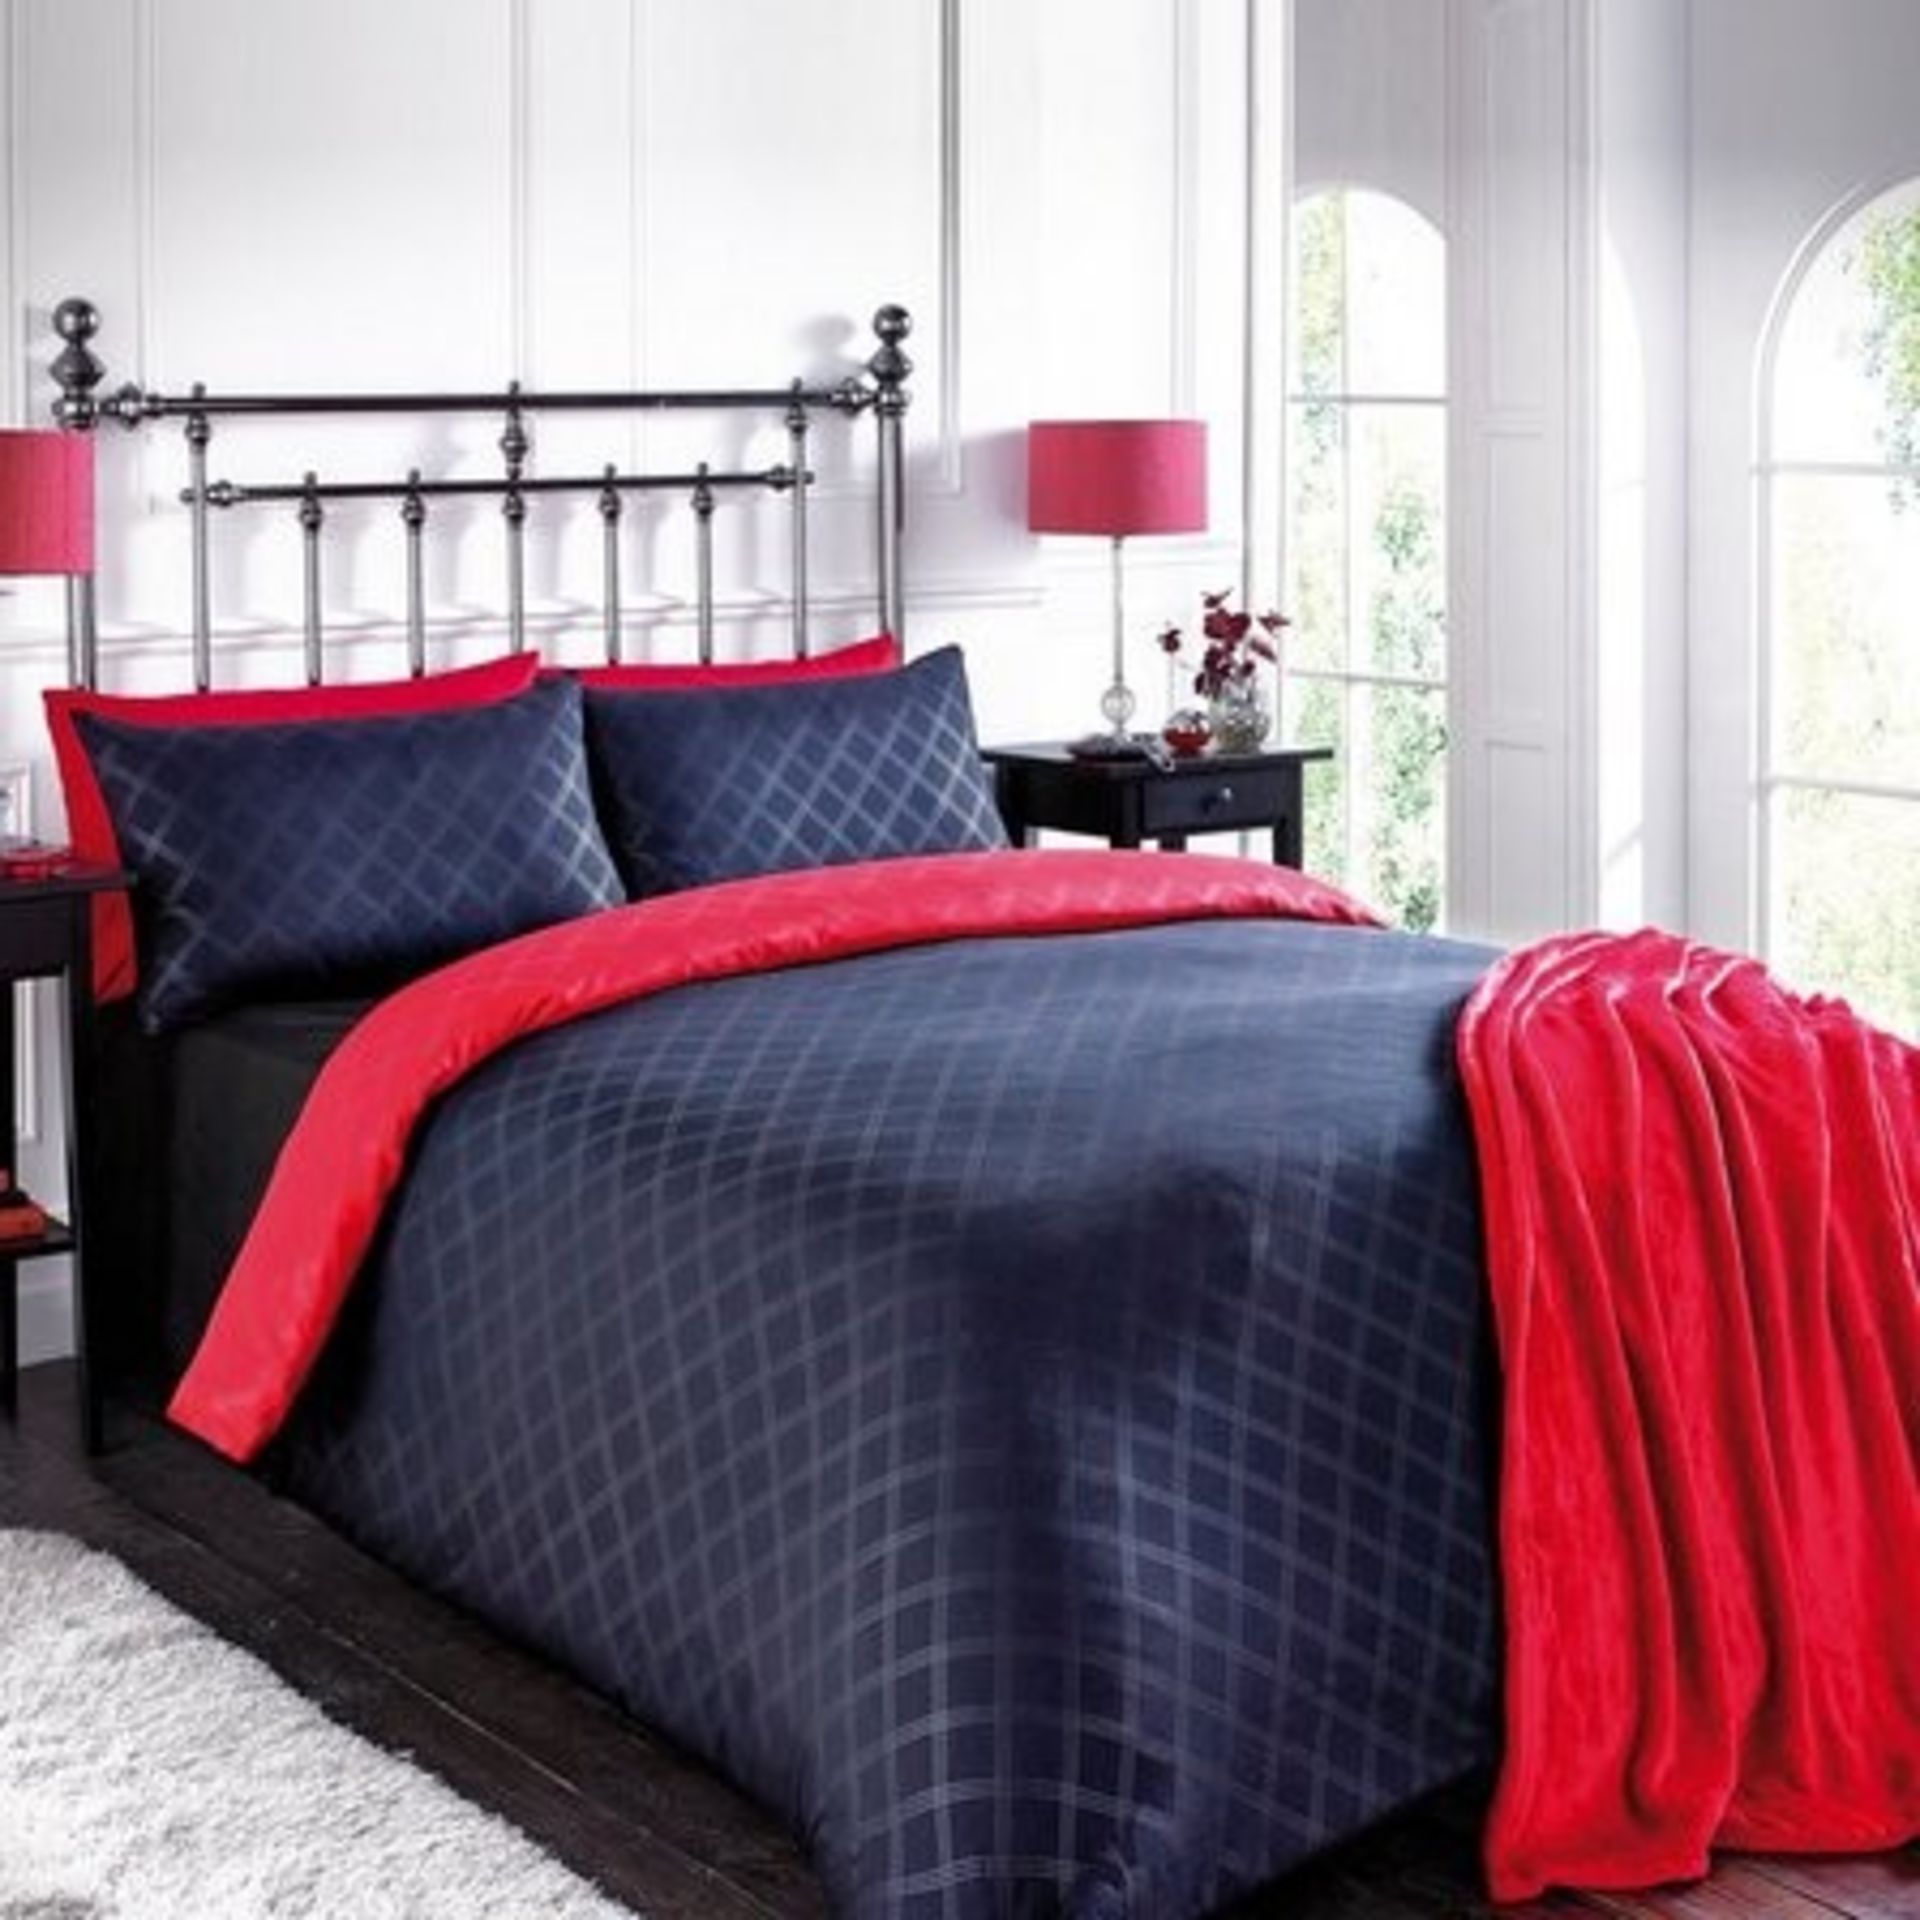 1 AS NEW BAGGED LINDON CHECK BED THROW IN RED / 13